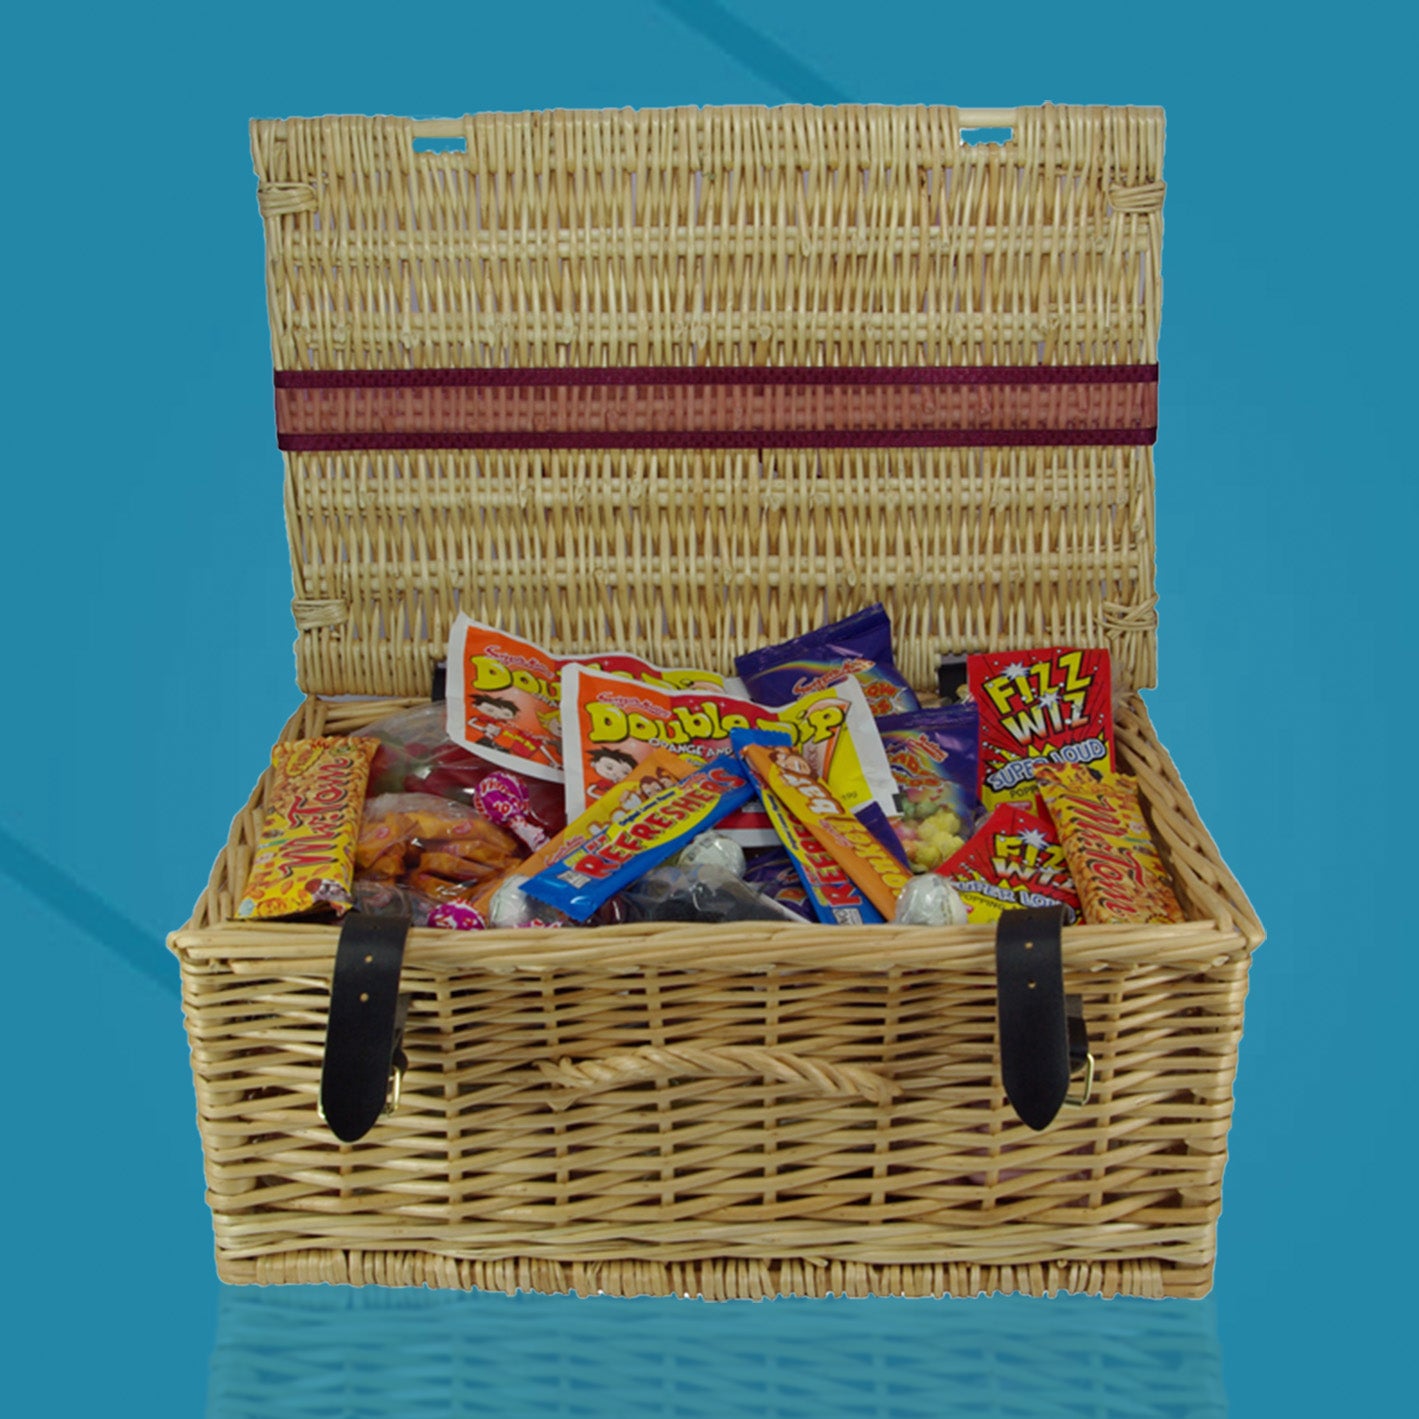 Retro Sweets Wicker Hampers - Full of all sorts of tasty treats from your childhood favourites - a great gift for someone with a sweet tooth!